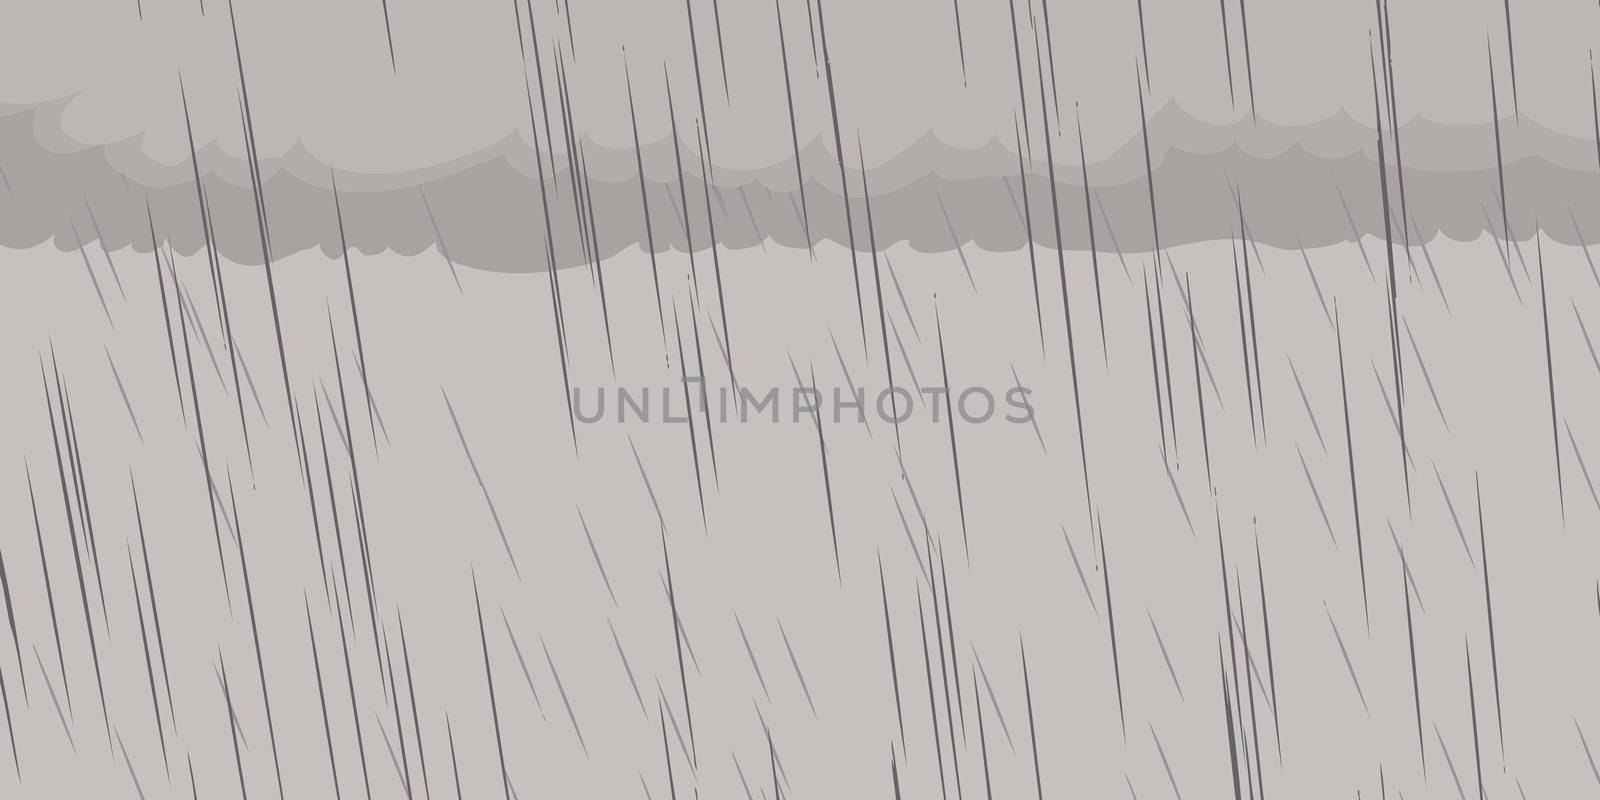 Background illustration of gray clouds during rainy storm